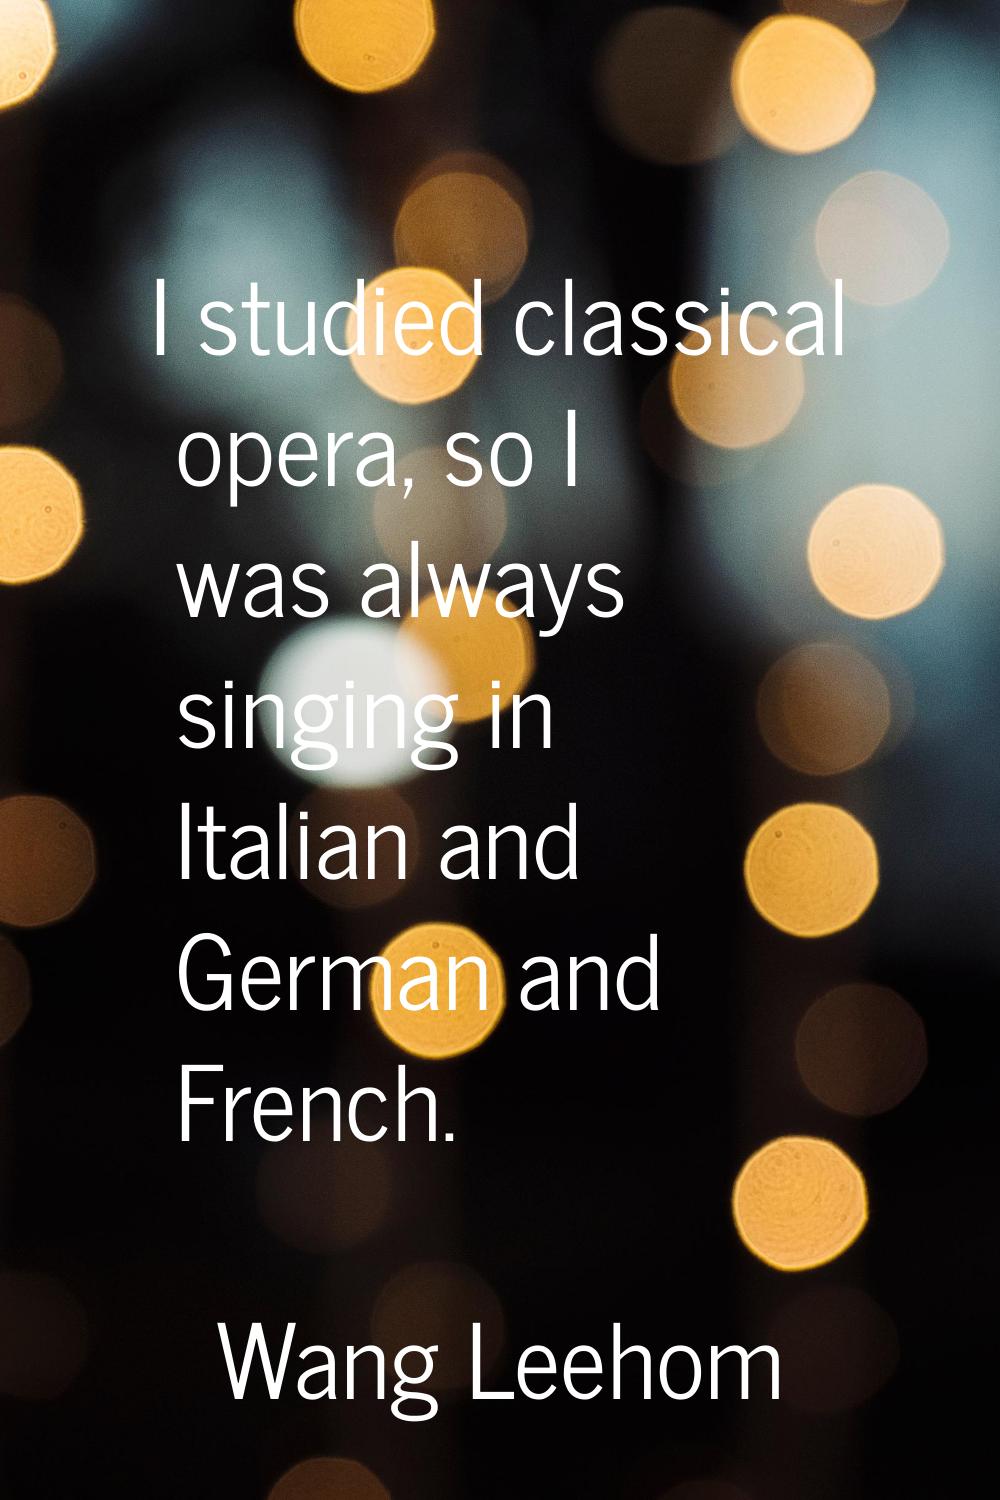 I studied classical opera, so I was always singing in Italian and German and French.